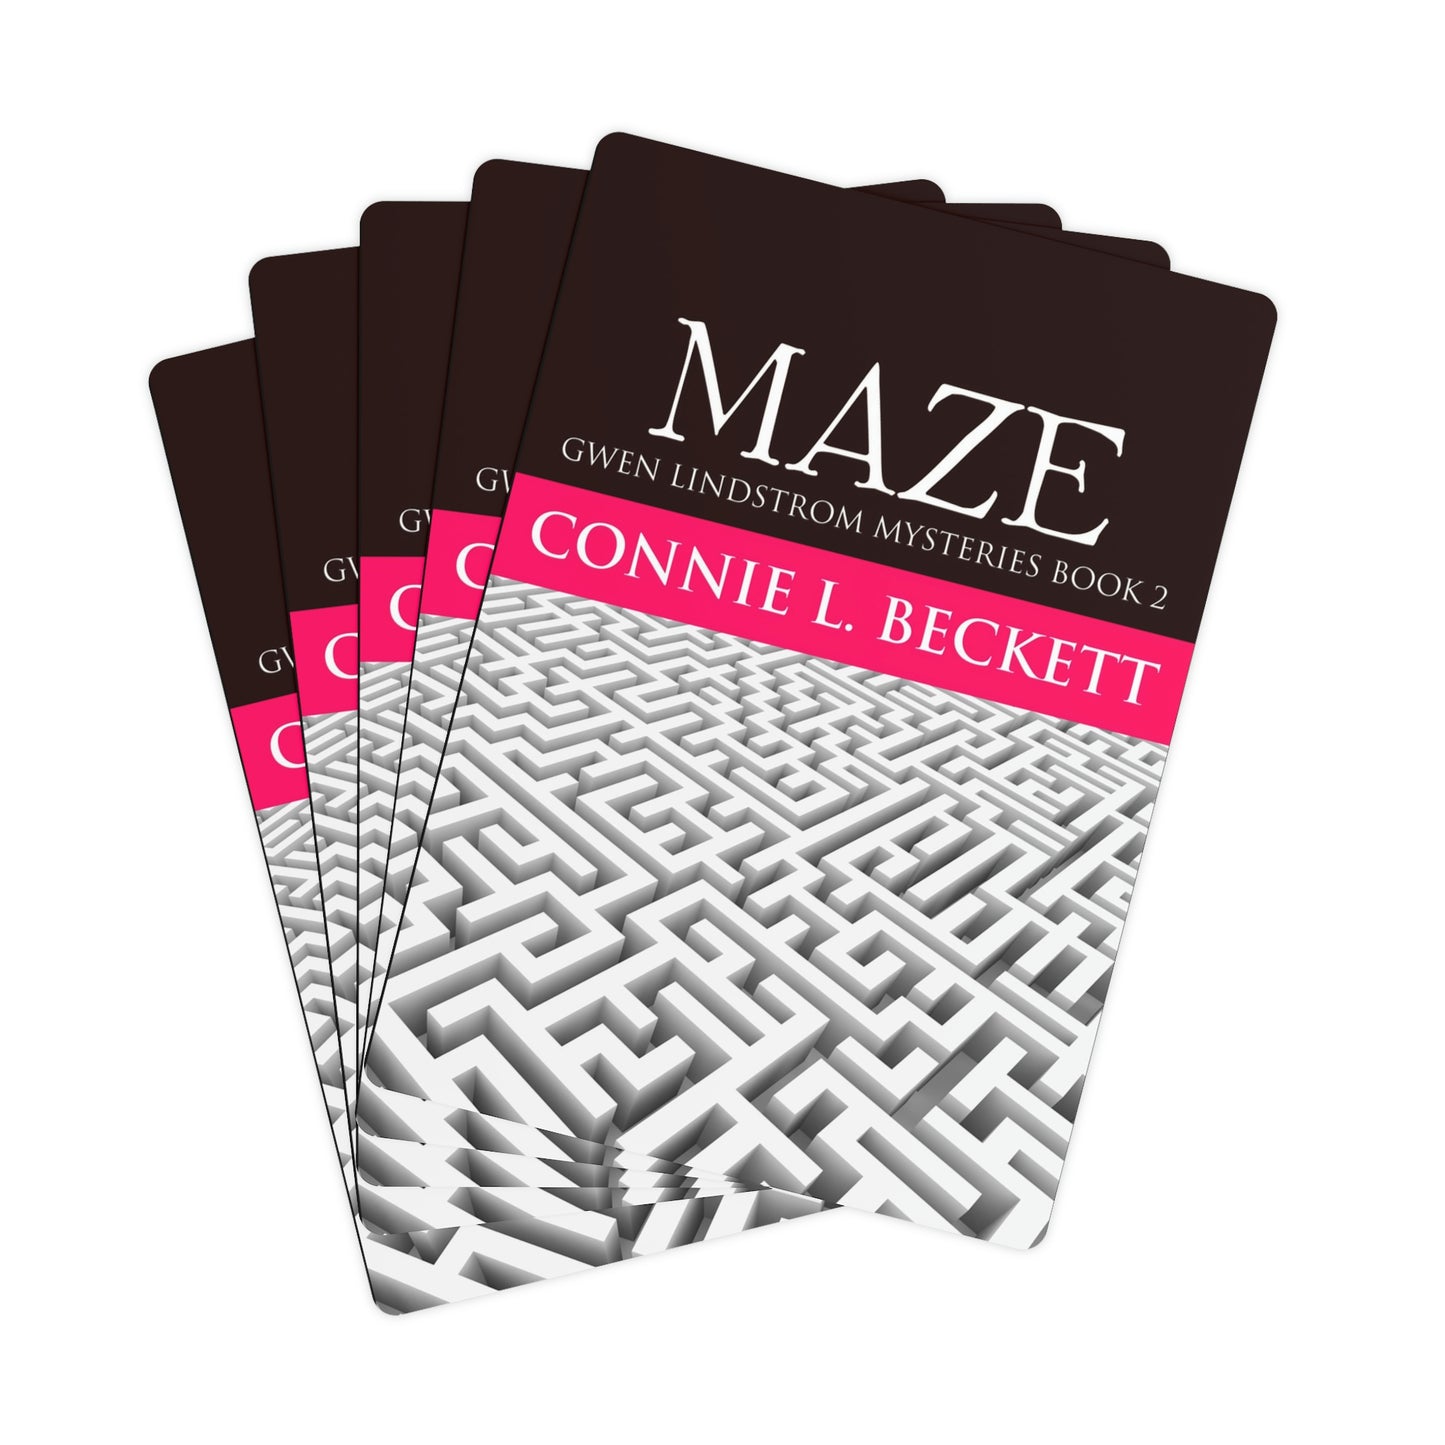 MAZE - Playing Cards